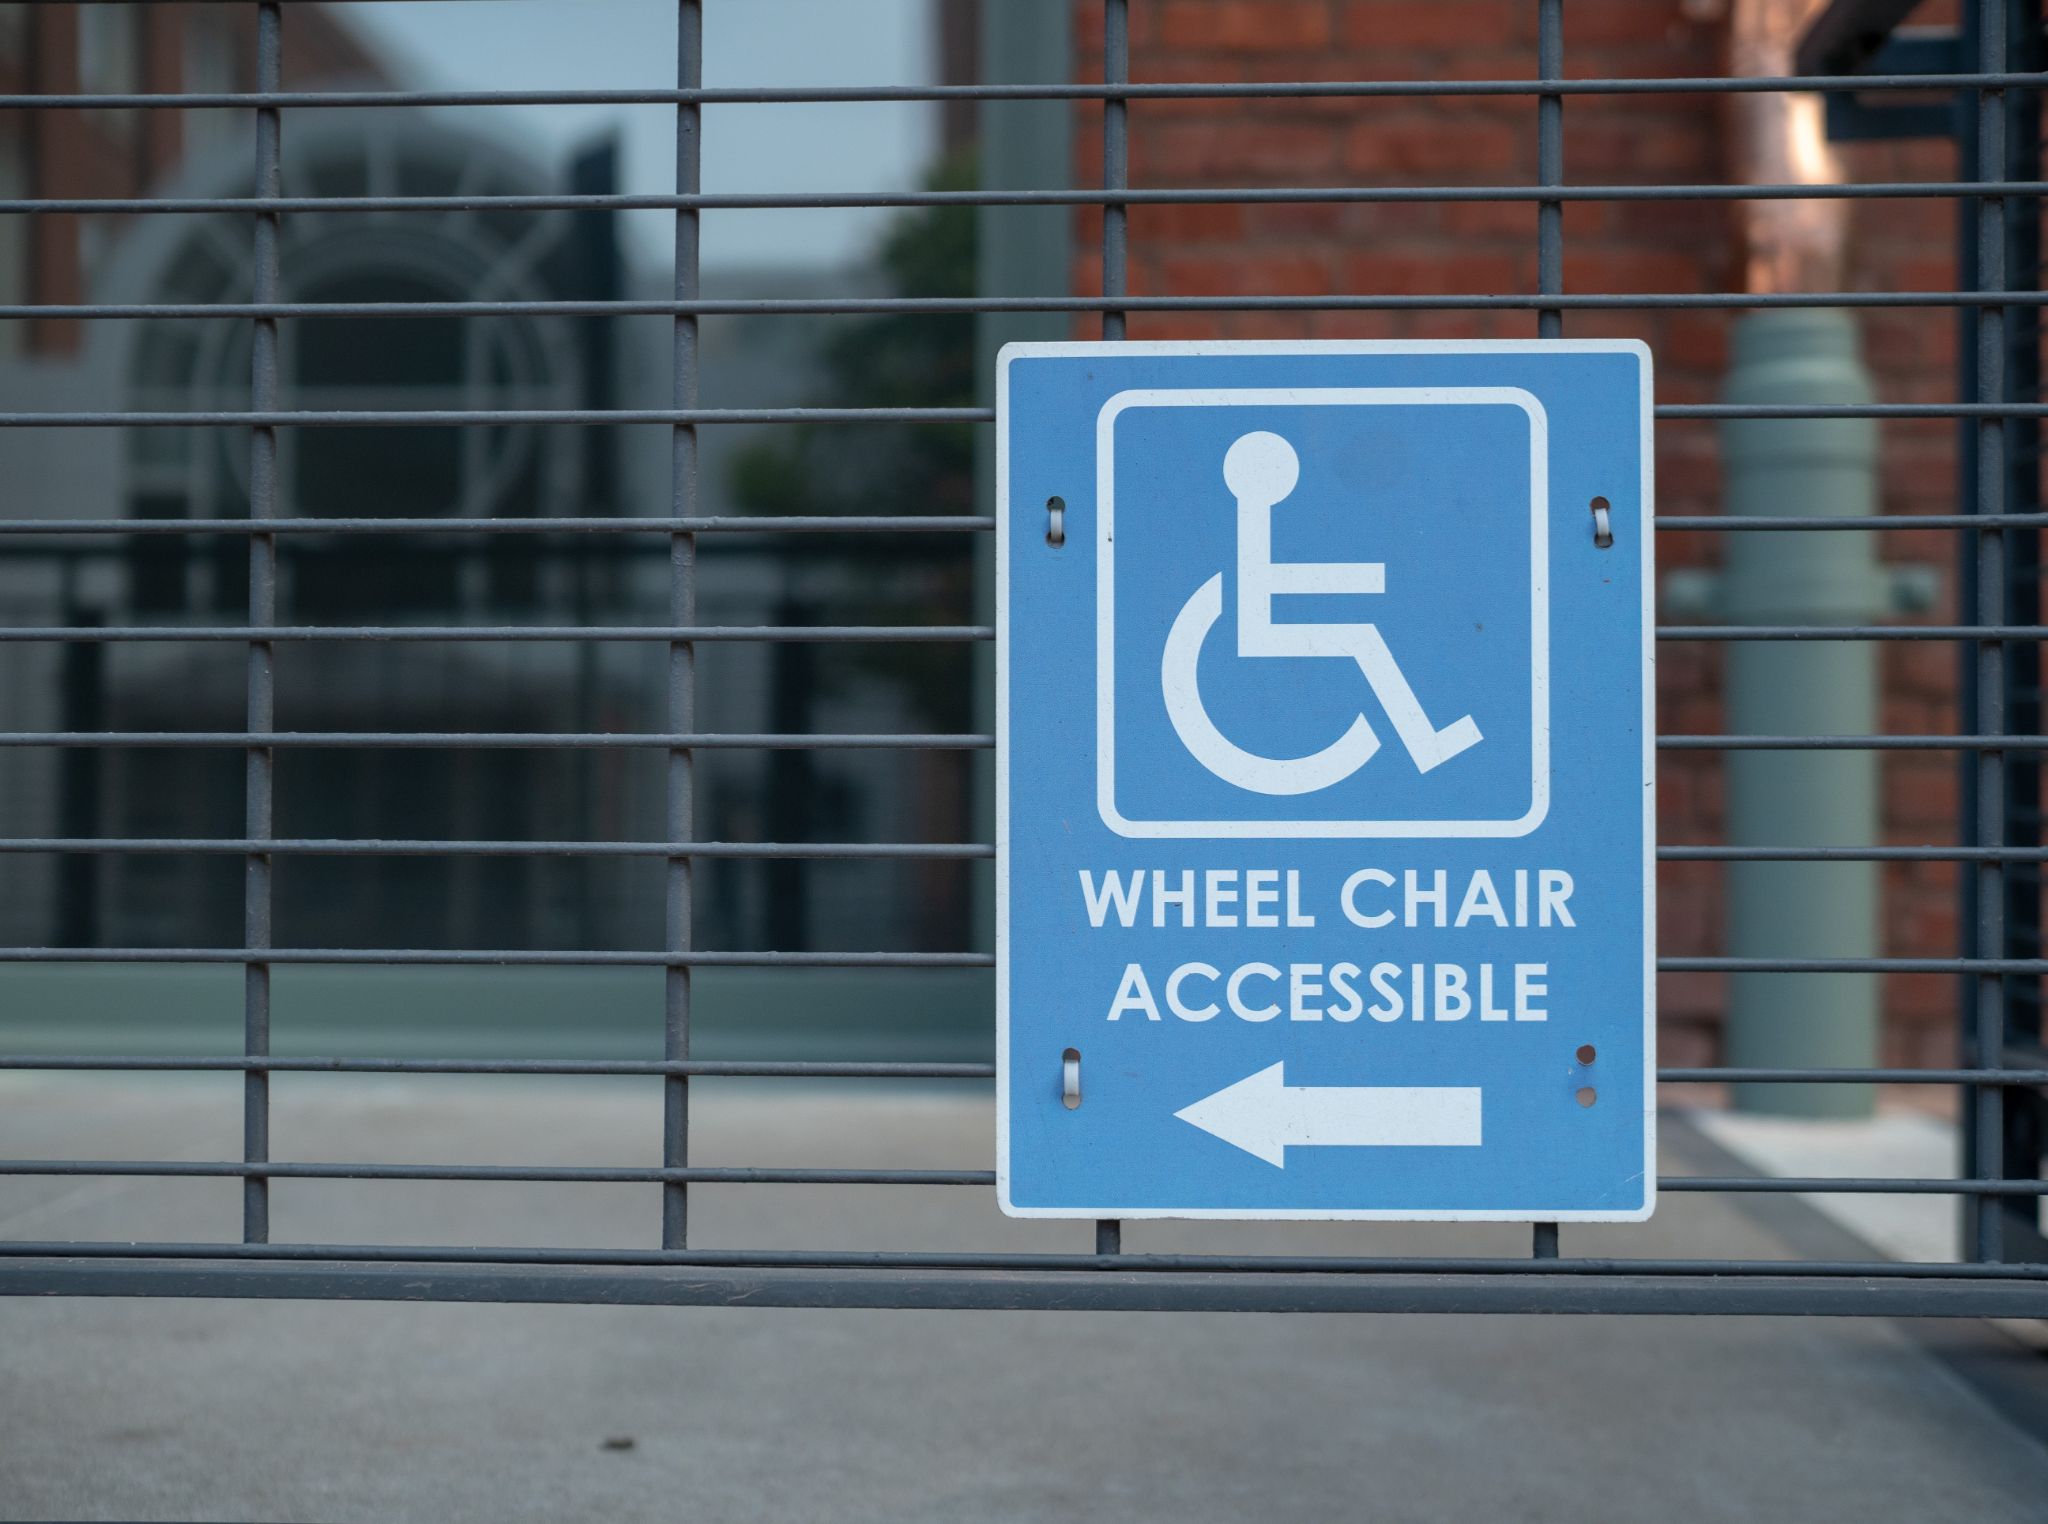 Handicap sign, wheel chair accessible logo pointing to left outdoor